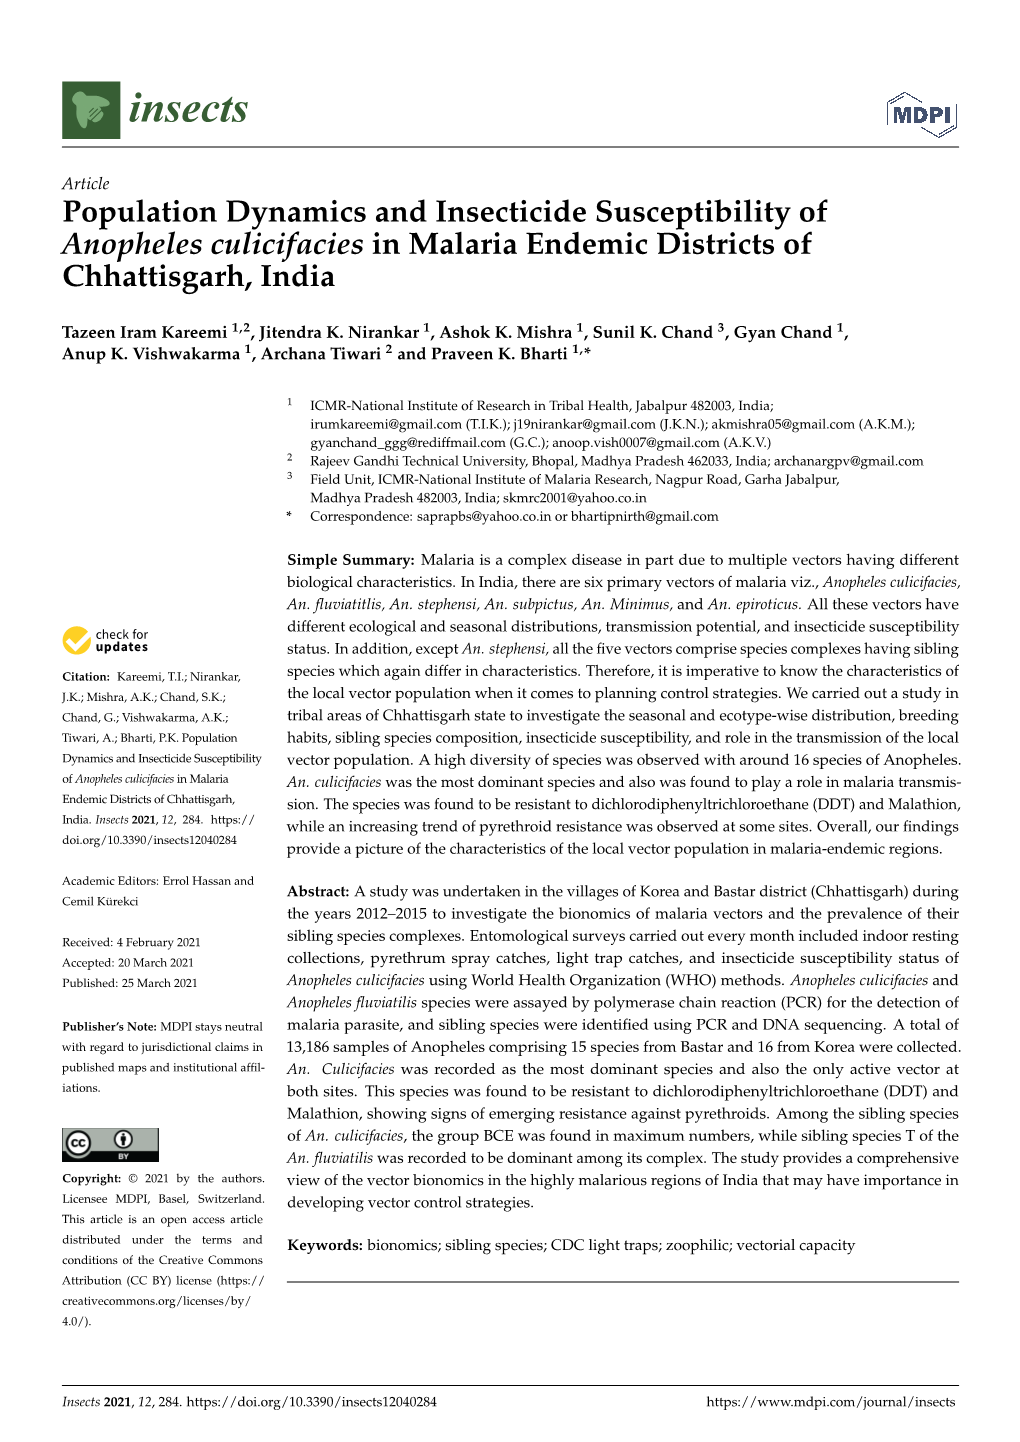 Population Dynamics and Insecticide Susceptibility of Anopheles Culicifacies in Malaria Endemic Districts of Chhattisgarh, India